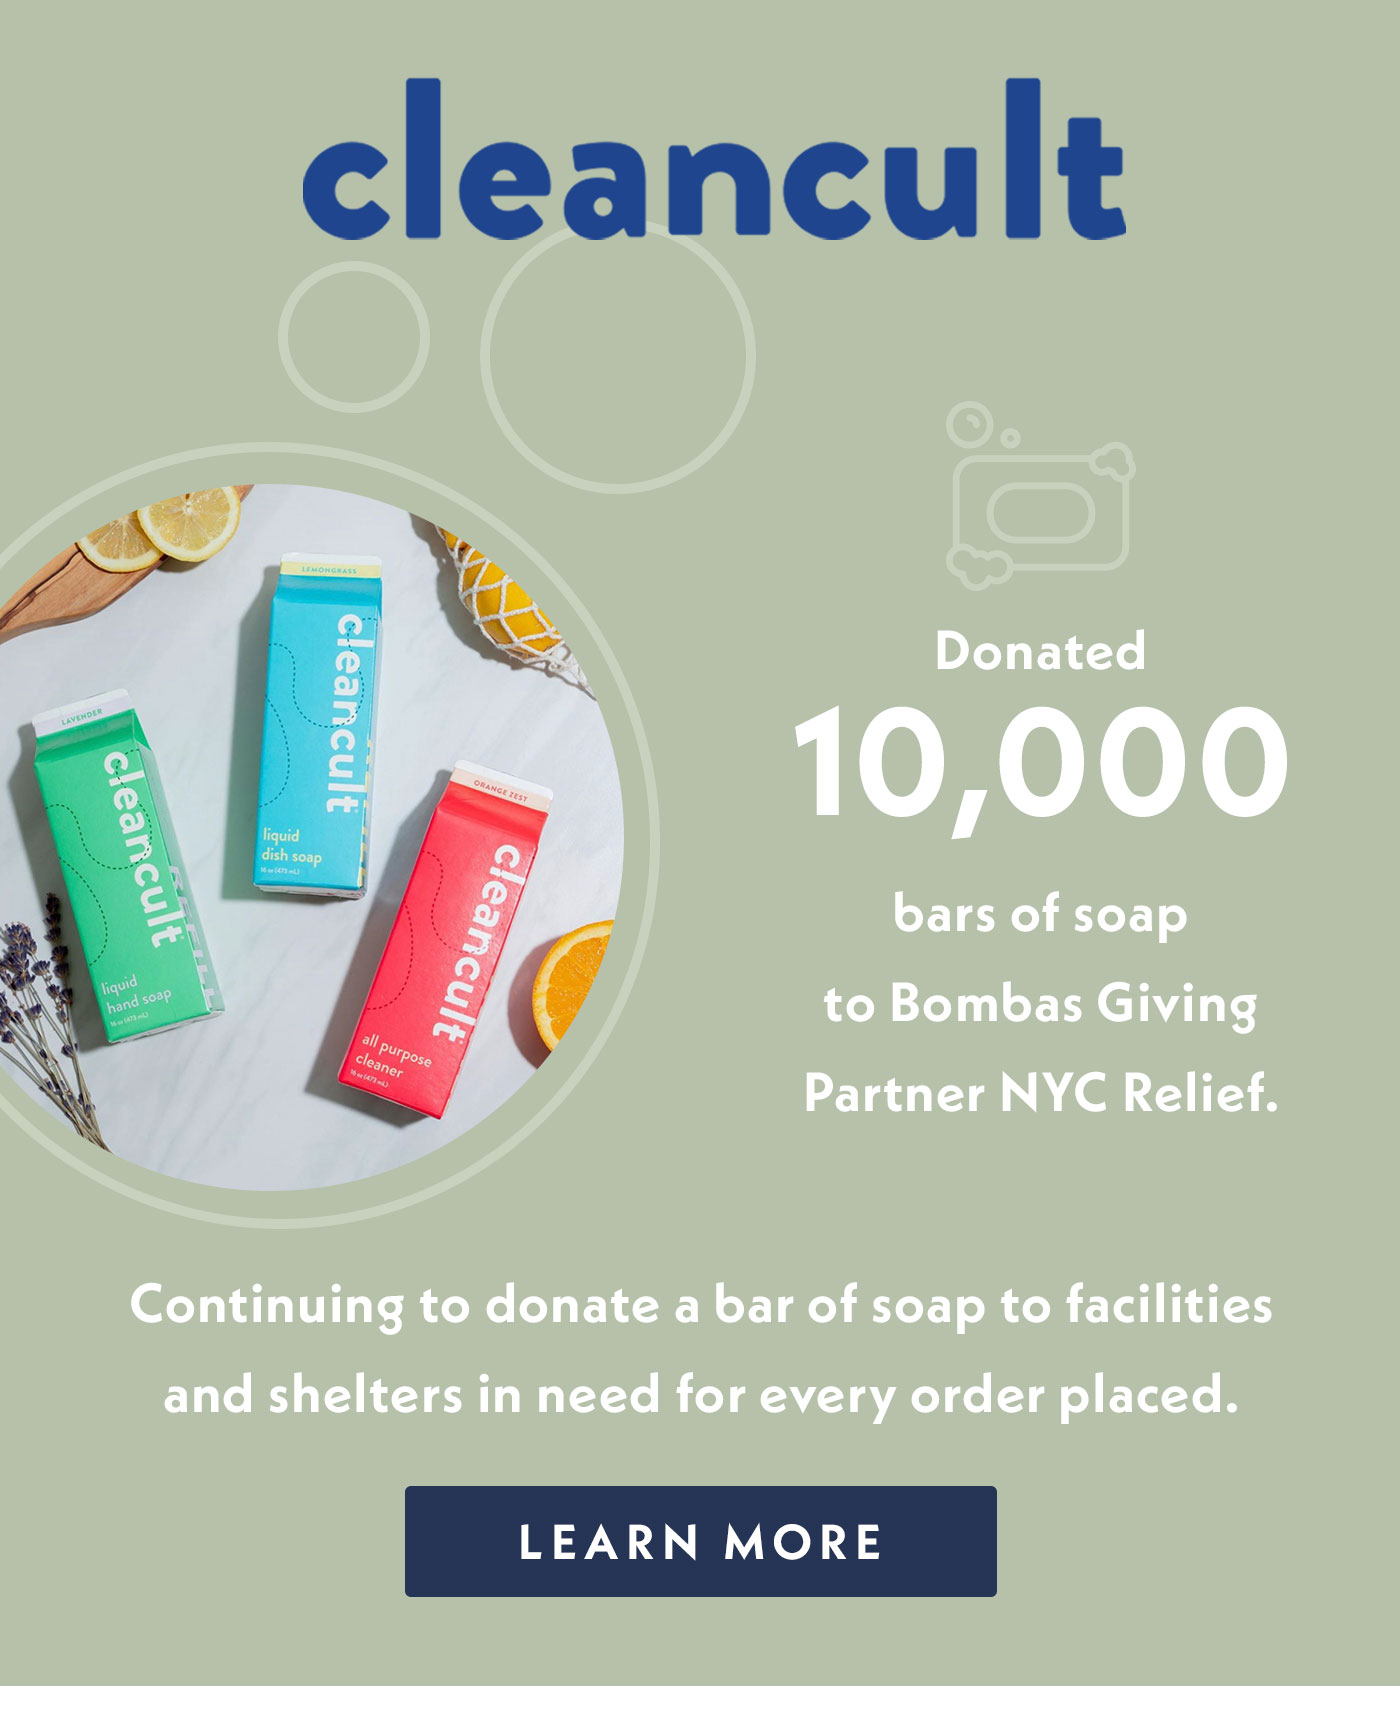 Cleancult donated 10,000 bars of soap to Bombas Giving Partner NYC Relief. They have continued to donate a bar of soap to facilities and shelters in need for every order placed.